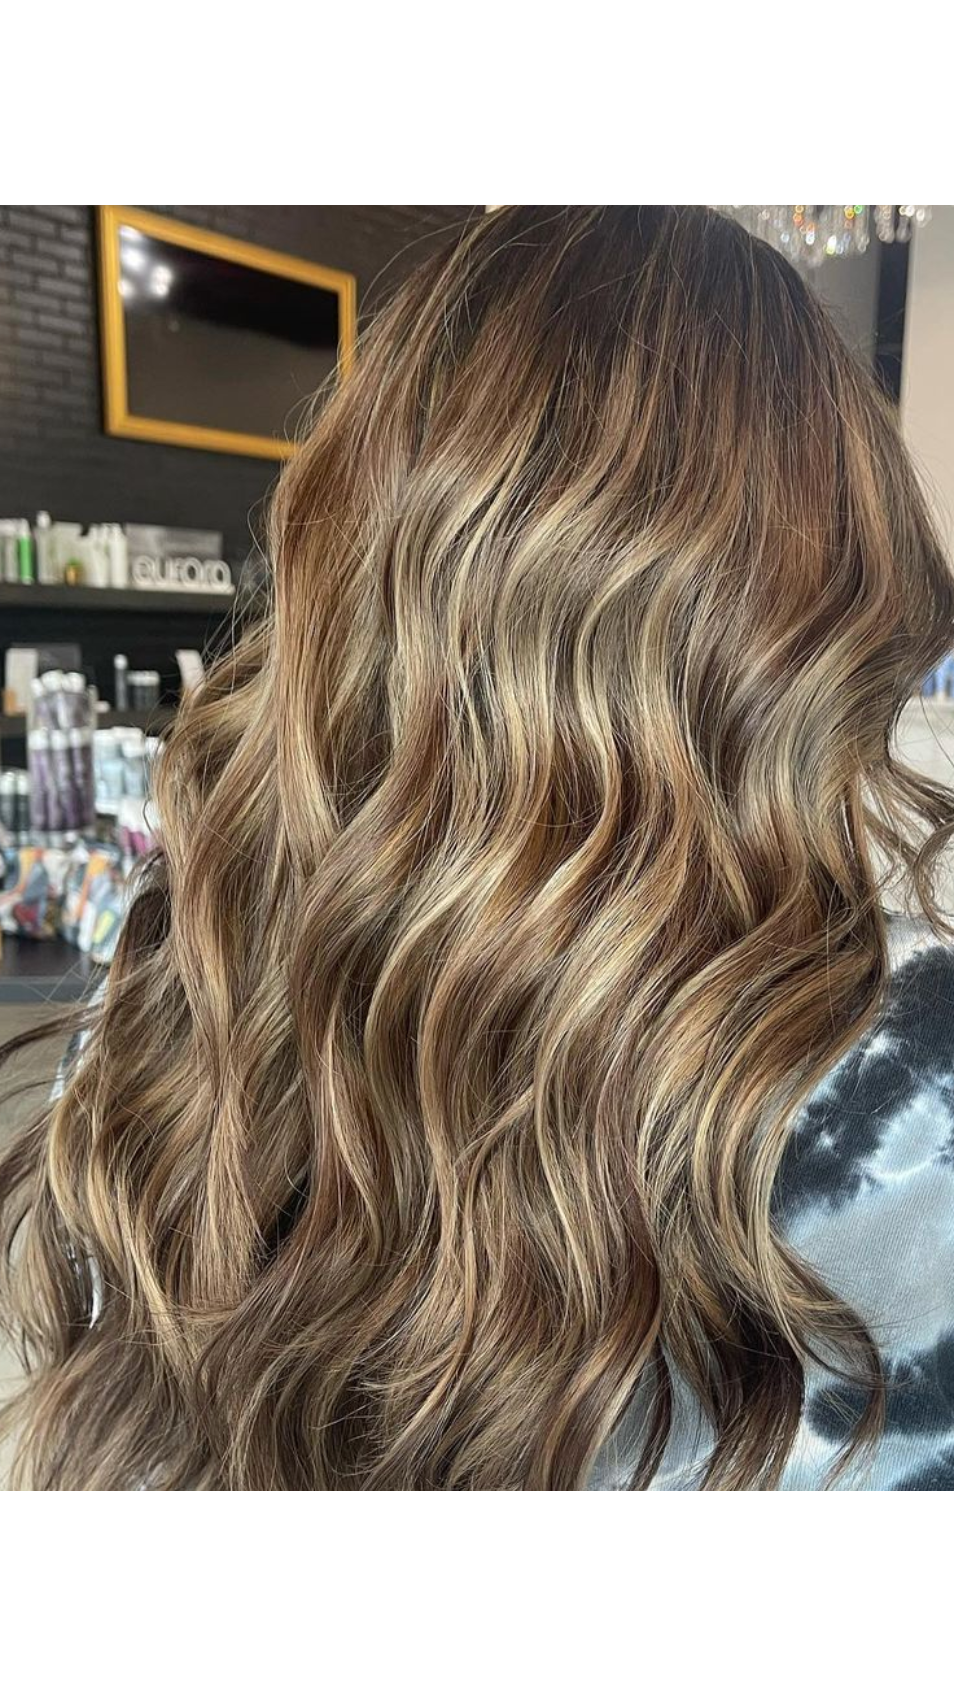 Top River Oaks Salon Offers Trending Balayage Highlights & Extensions Services